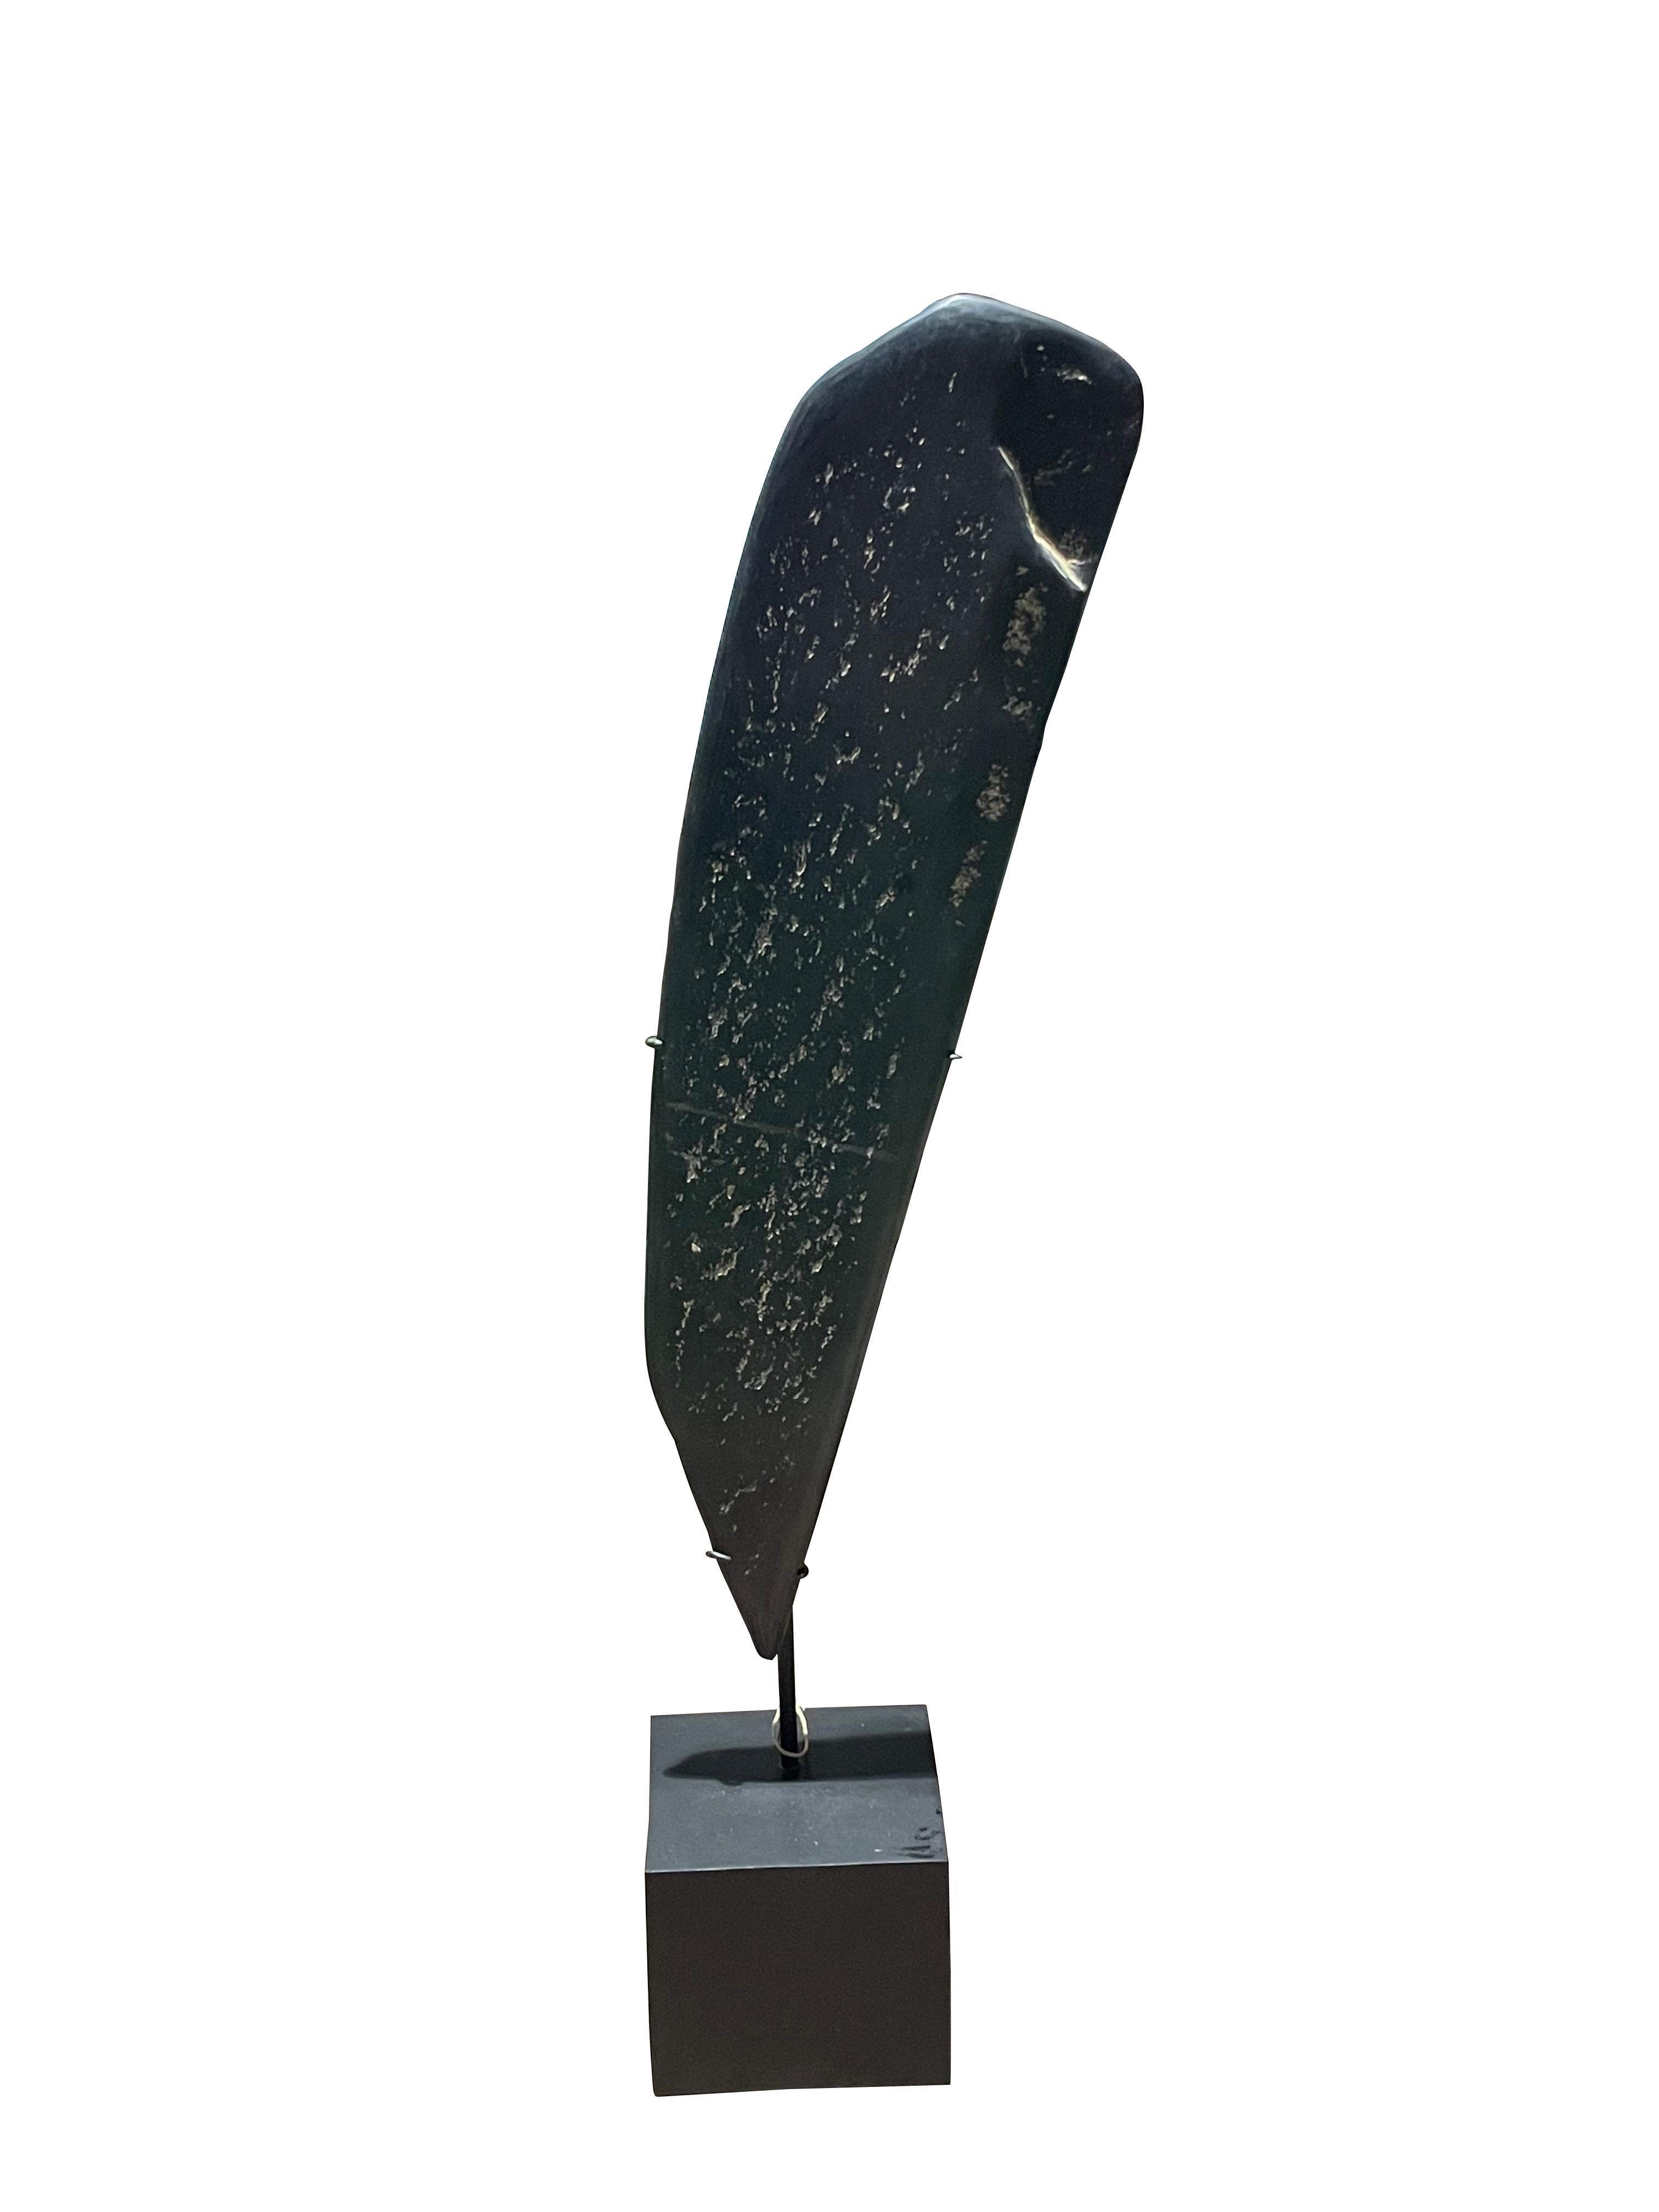 19th century Indonesian smooth black stone paddle sculpture.
Subtle white markings.
Mounted on steel stand.
Two available and sold individually.
